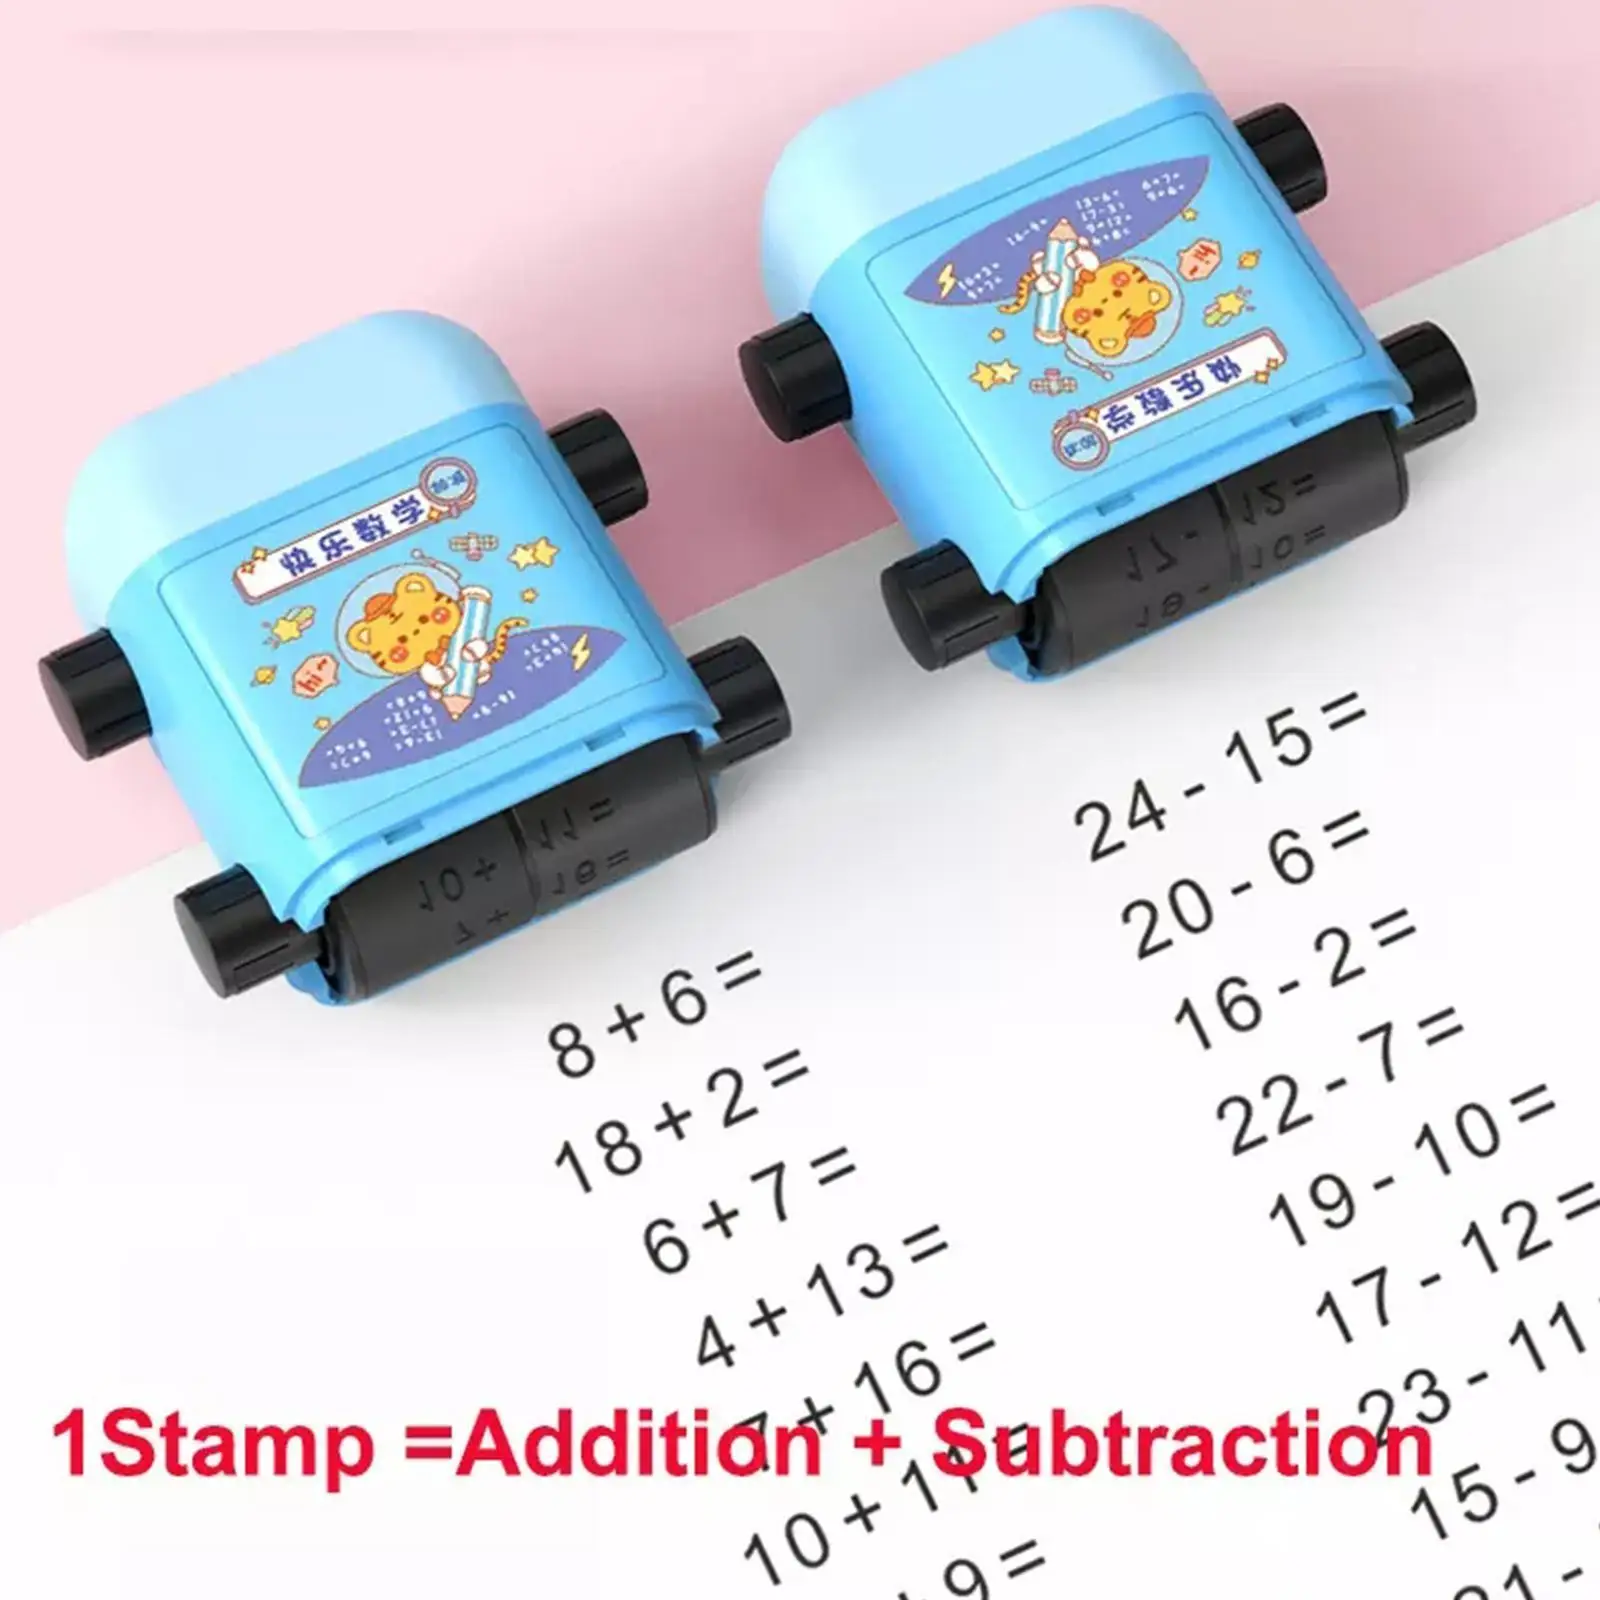 1pc Number Rolling Stamp Addition And Subtraction Question Stamp Digital Math Pupils Within Practice Questions Stamp 100 Ro K8O8